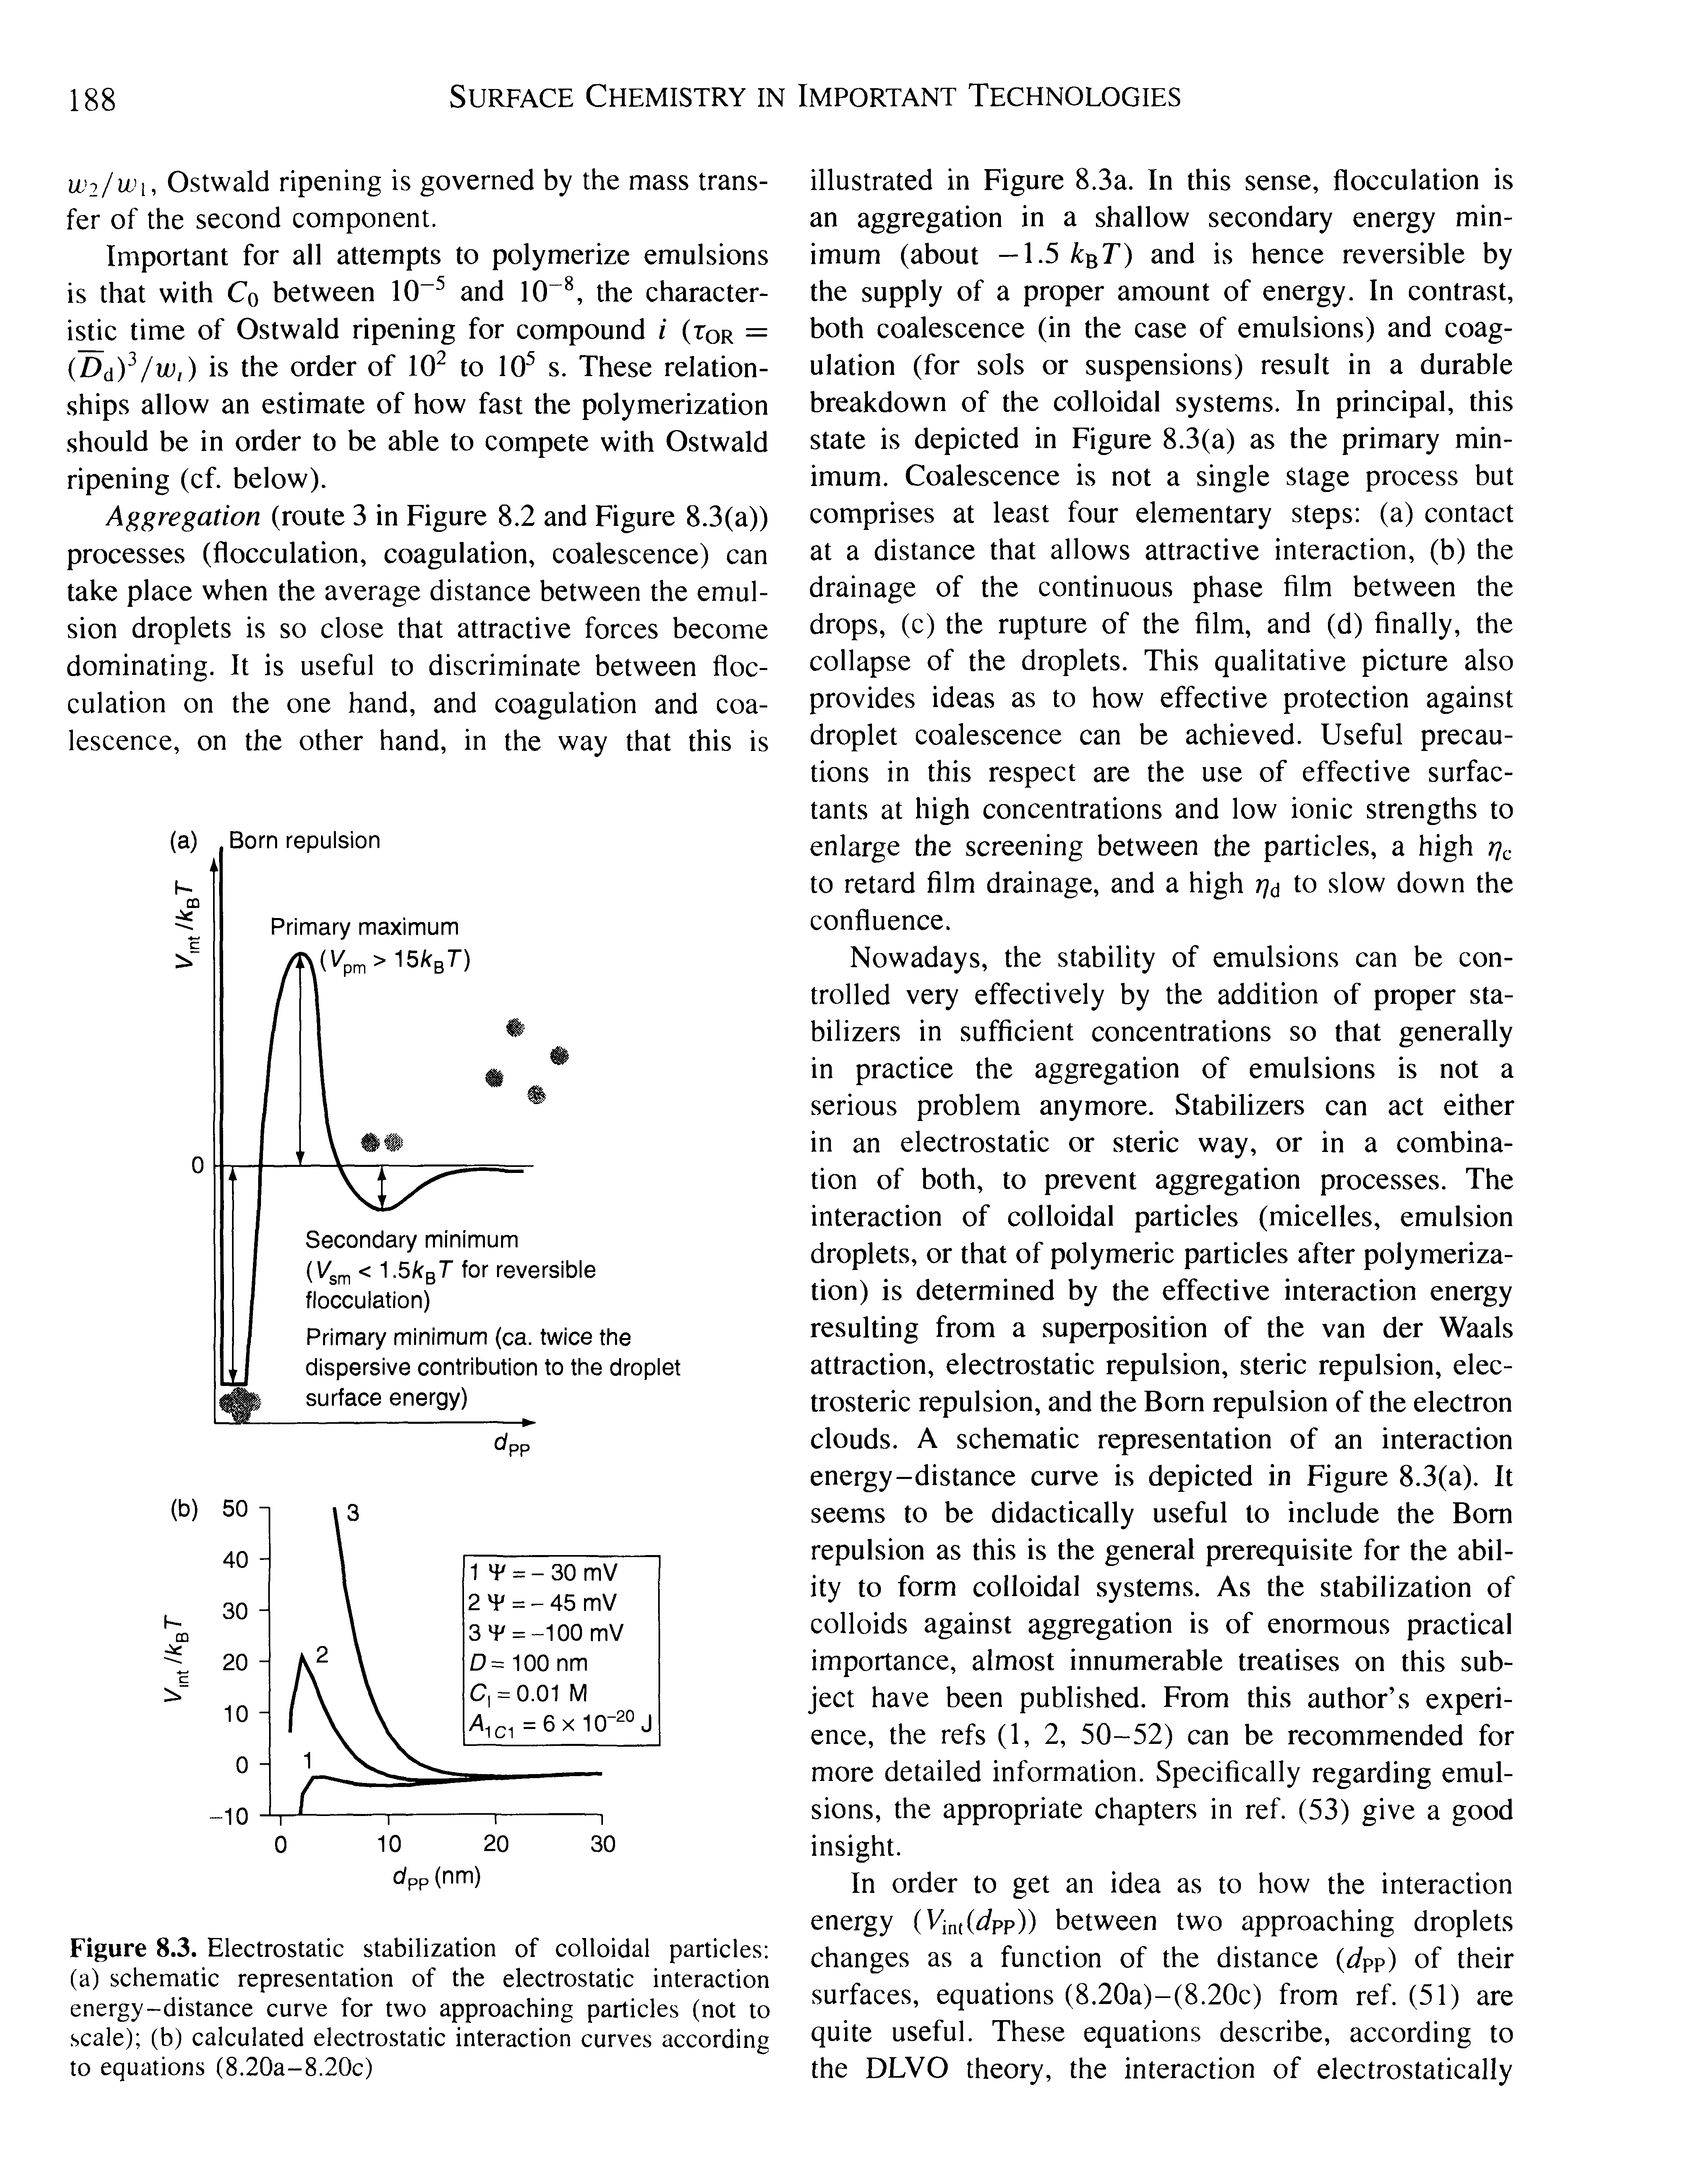 Figure 8.3. Electrostatic stabilization of colloidal particles (a) schematic representation of the electrostatic interaction energy-distance curve for two approaching particles (not to scale) (b) calculated electrostatic interaction curves according to equations (8.20a-8.20c)...